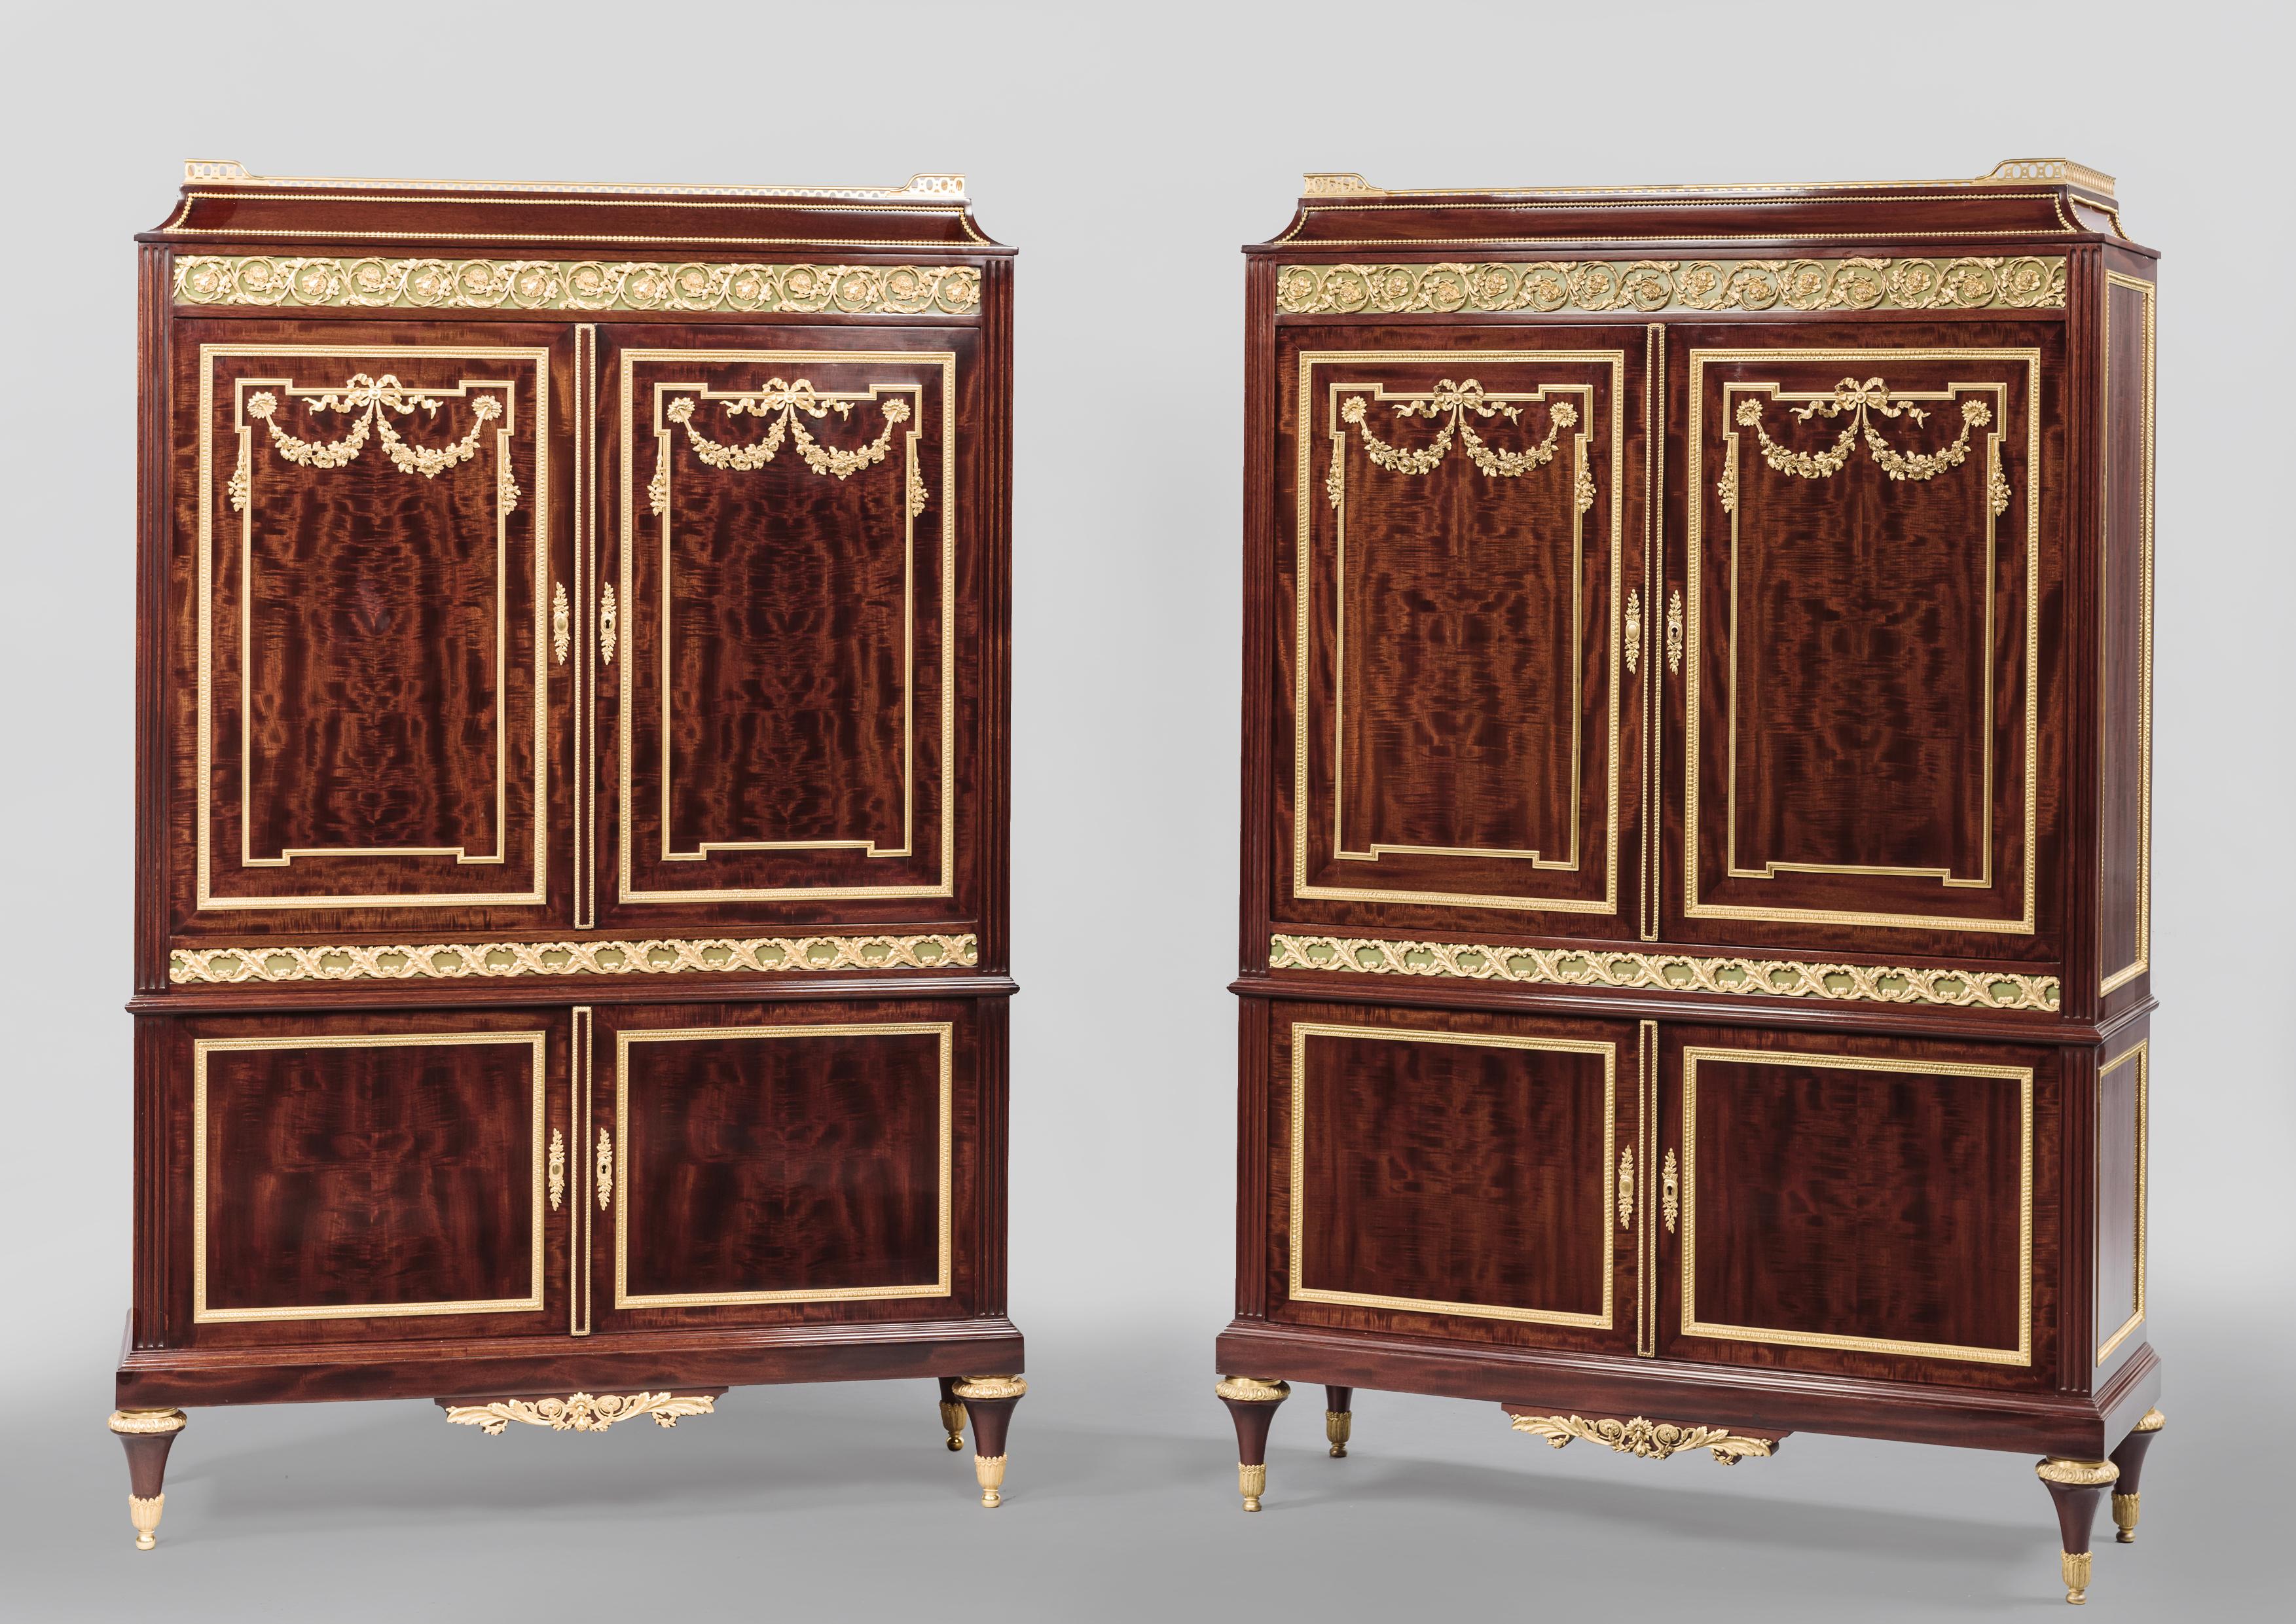 A fine Pair of Louis XVI Style Gilt Bronze Mounted Mahogany Cabinets by Paul Sormani. 

Paris, circa 1870.

Signed to the lockplates 'P. Sormani', 10 rue Charlot à Paris'. 

This important pair of cabinets are veneered in a rich flame mahogany